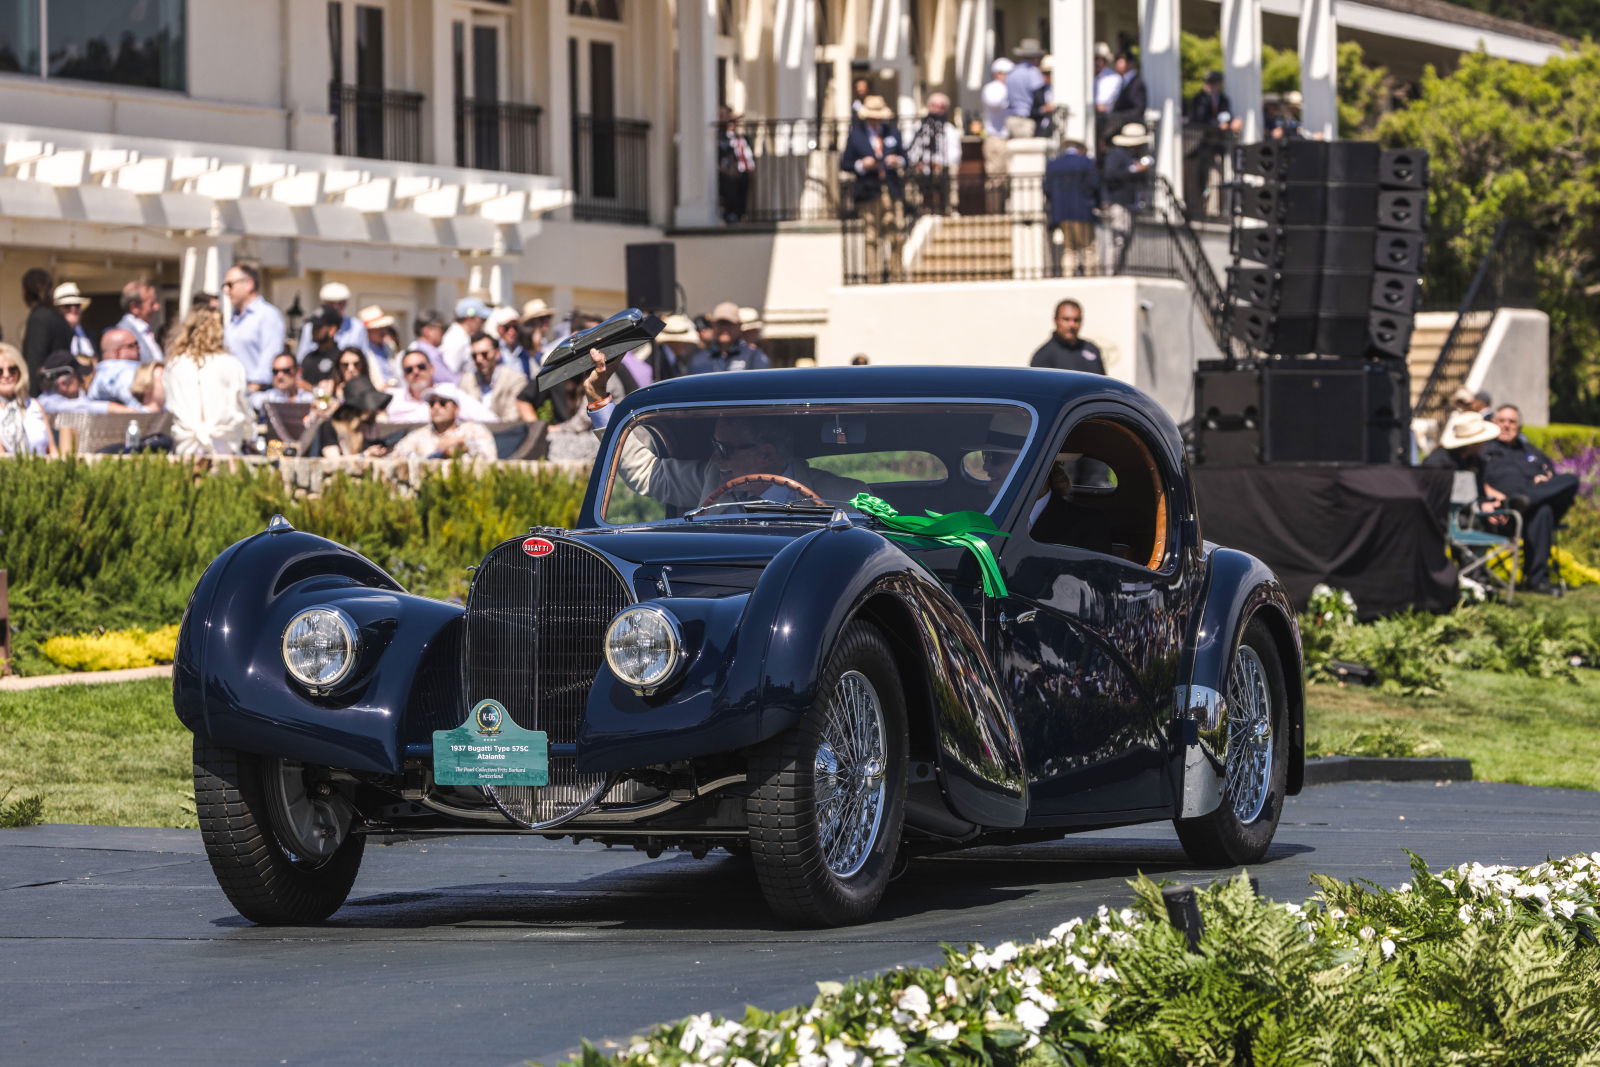 Bugatti Type 57 chassis Atalante - Concours d'Elegance on the Pebble Beach golf course - Monterey Car Week